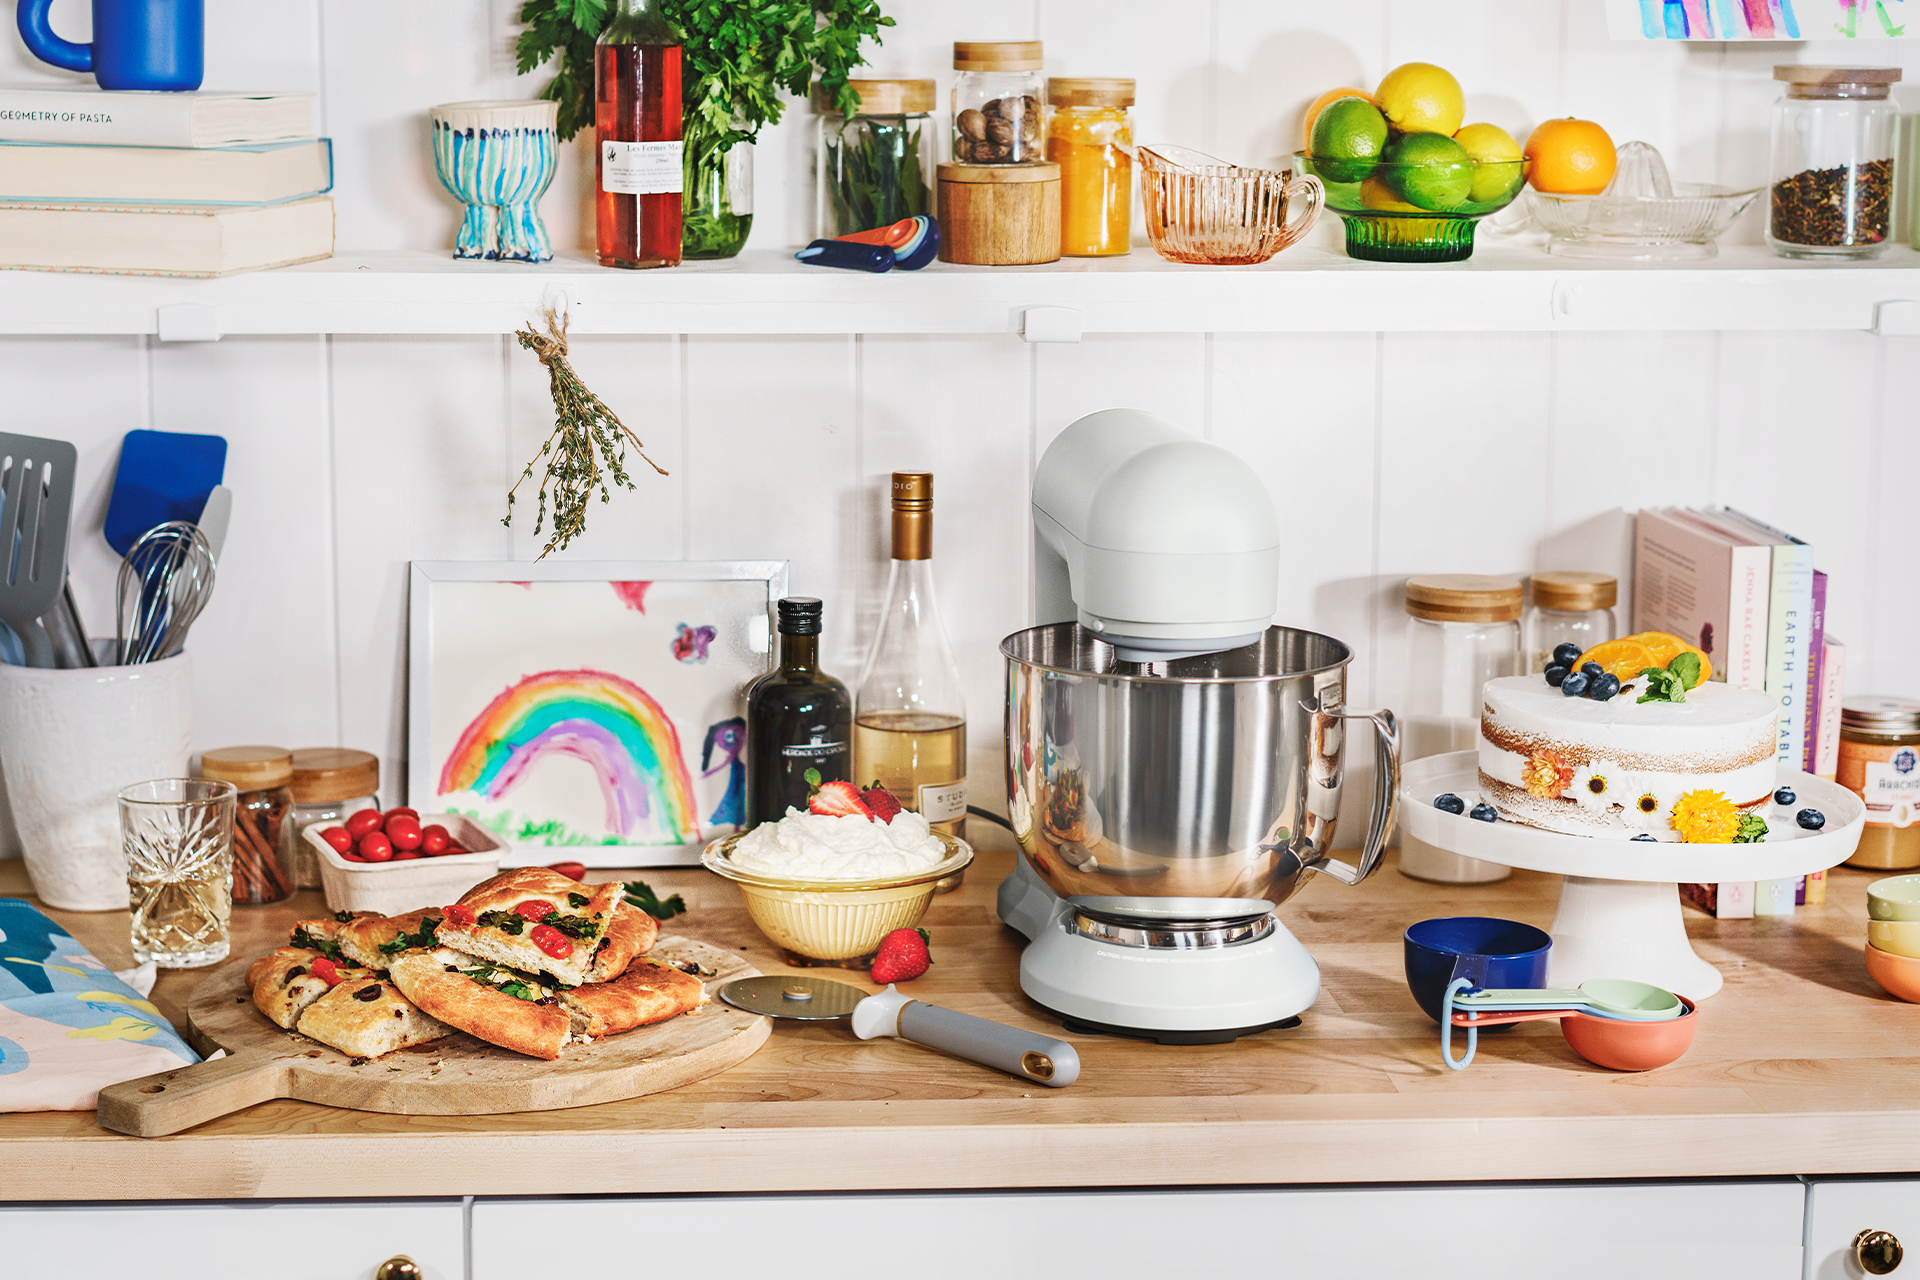 Barrymore's Beautiful Kitchenware Adds New Mixers, Colorway